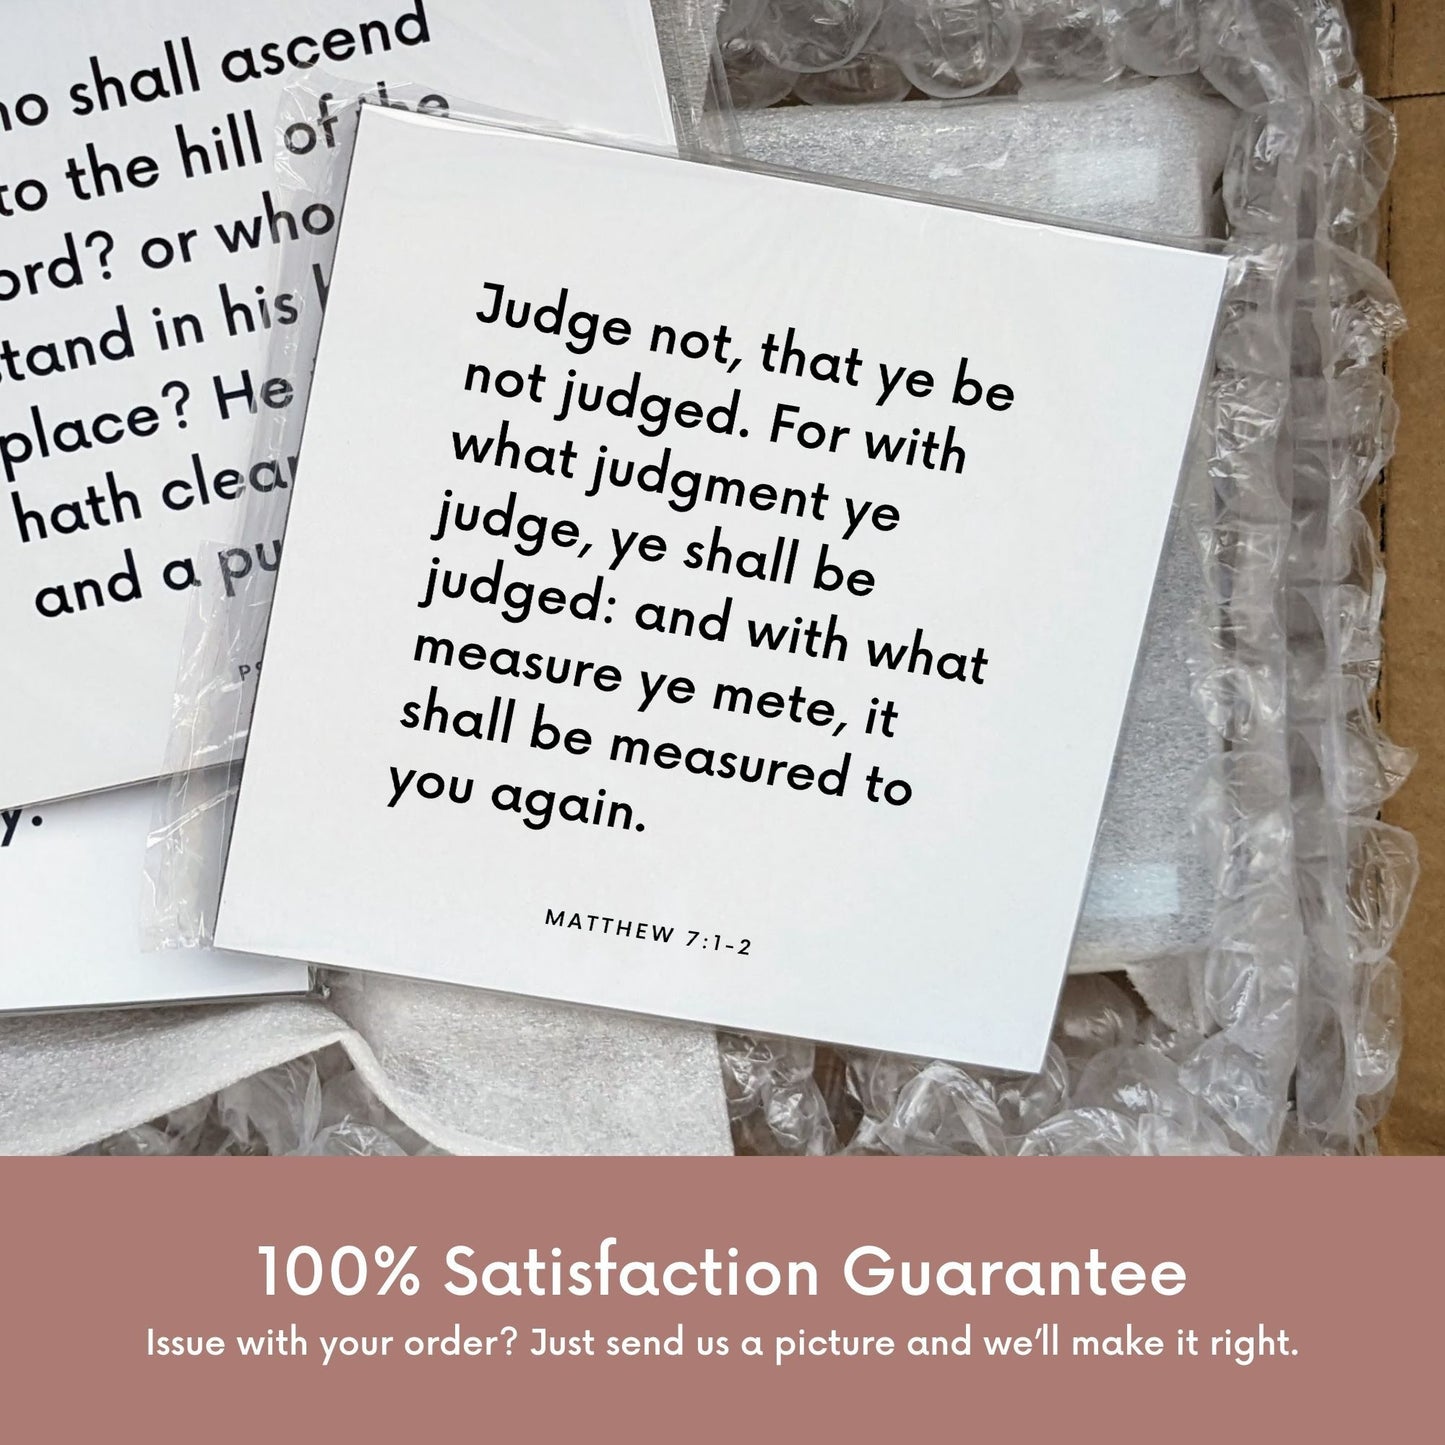 Shipping materials for scripture tile of Matthew 7:1-2 - "Judge not, that ye be not judged"